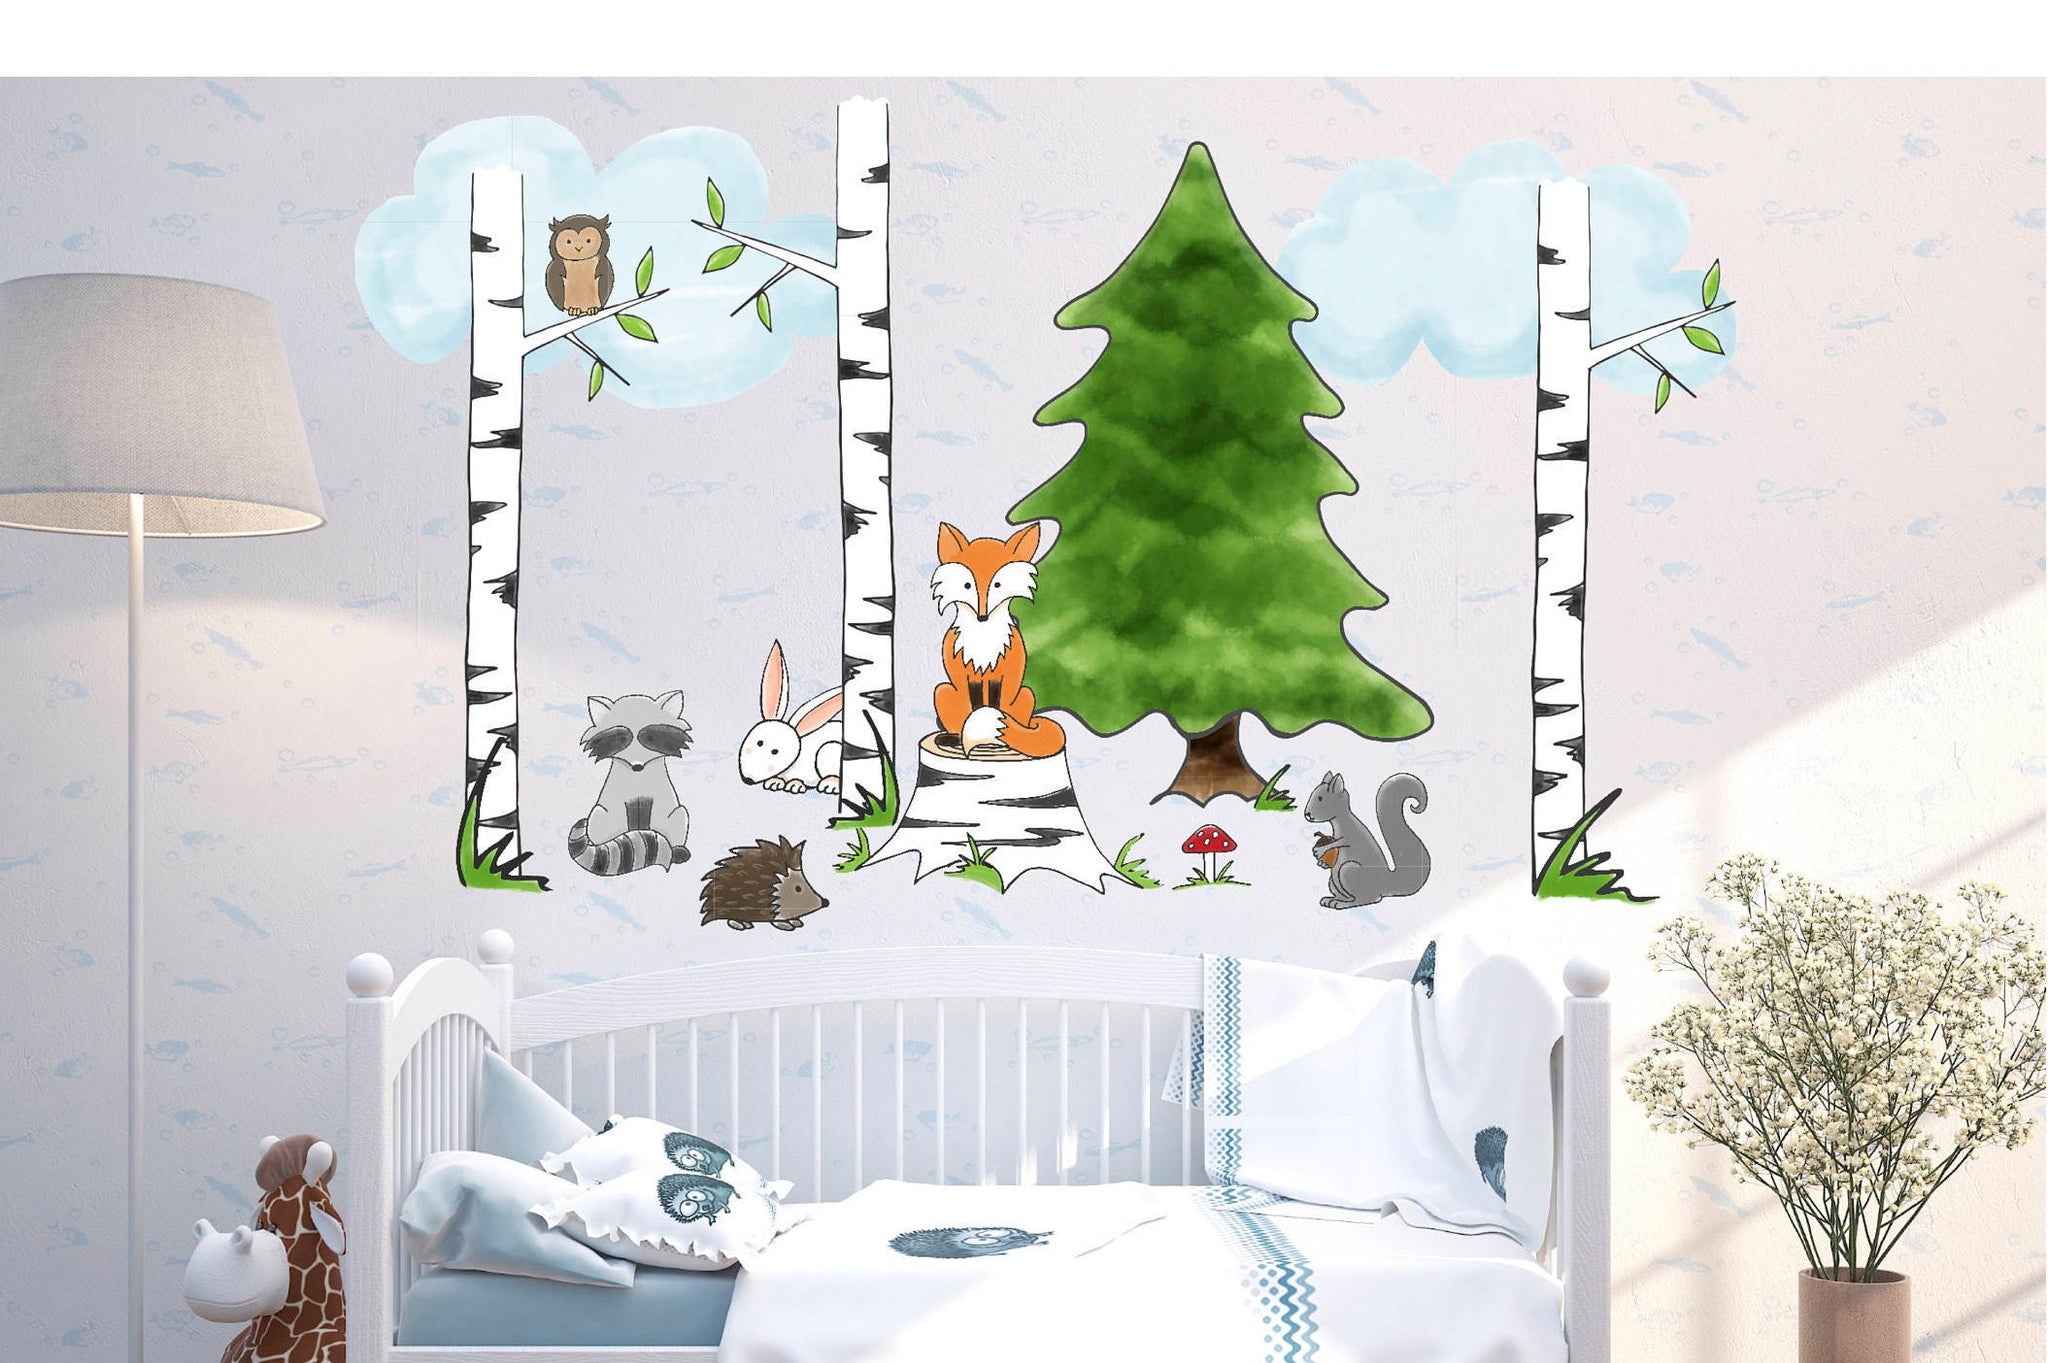 Nursery Forest Animal Fabric Wall Decals, Woodland nursery decor Boy, fox nursery decal, animal nursery decal, animal Baby room wall decor